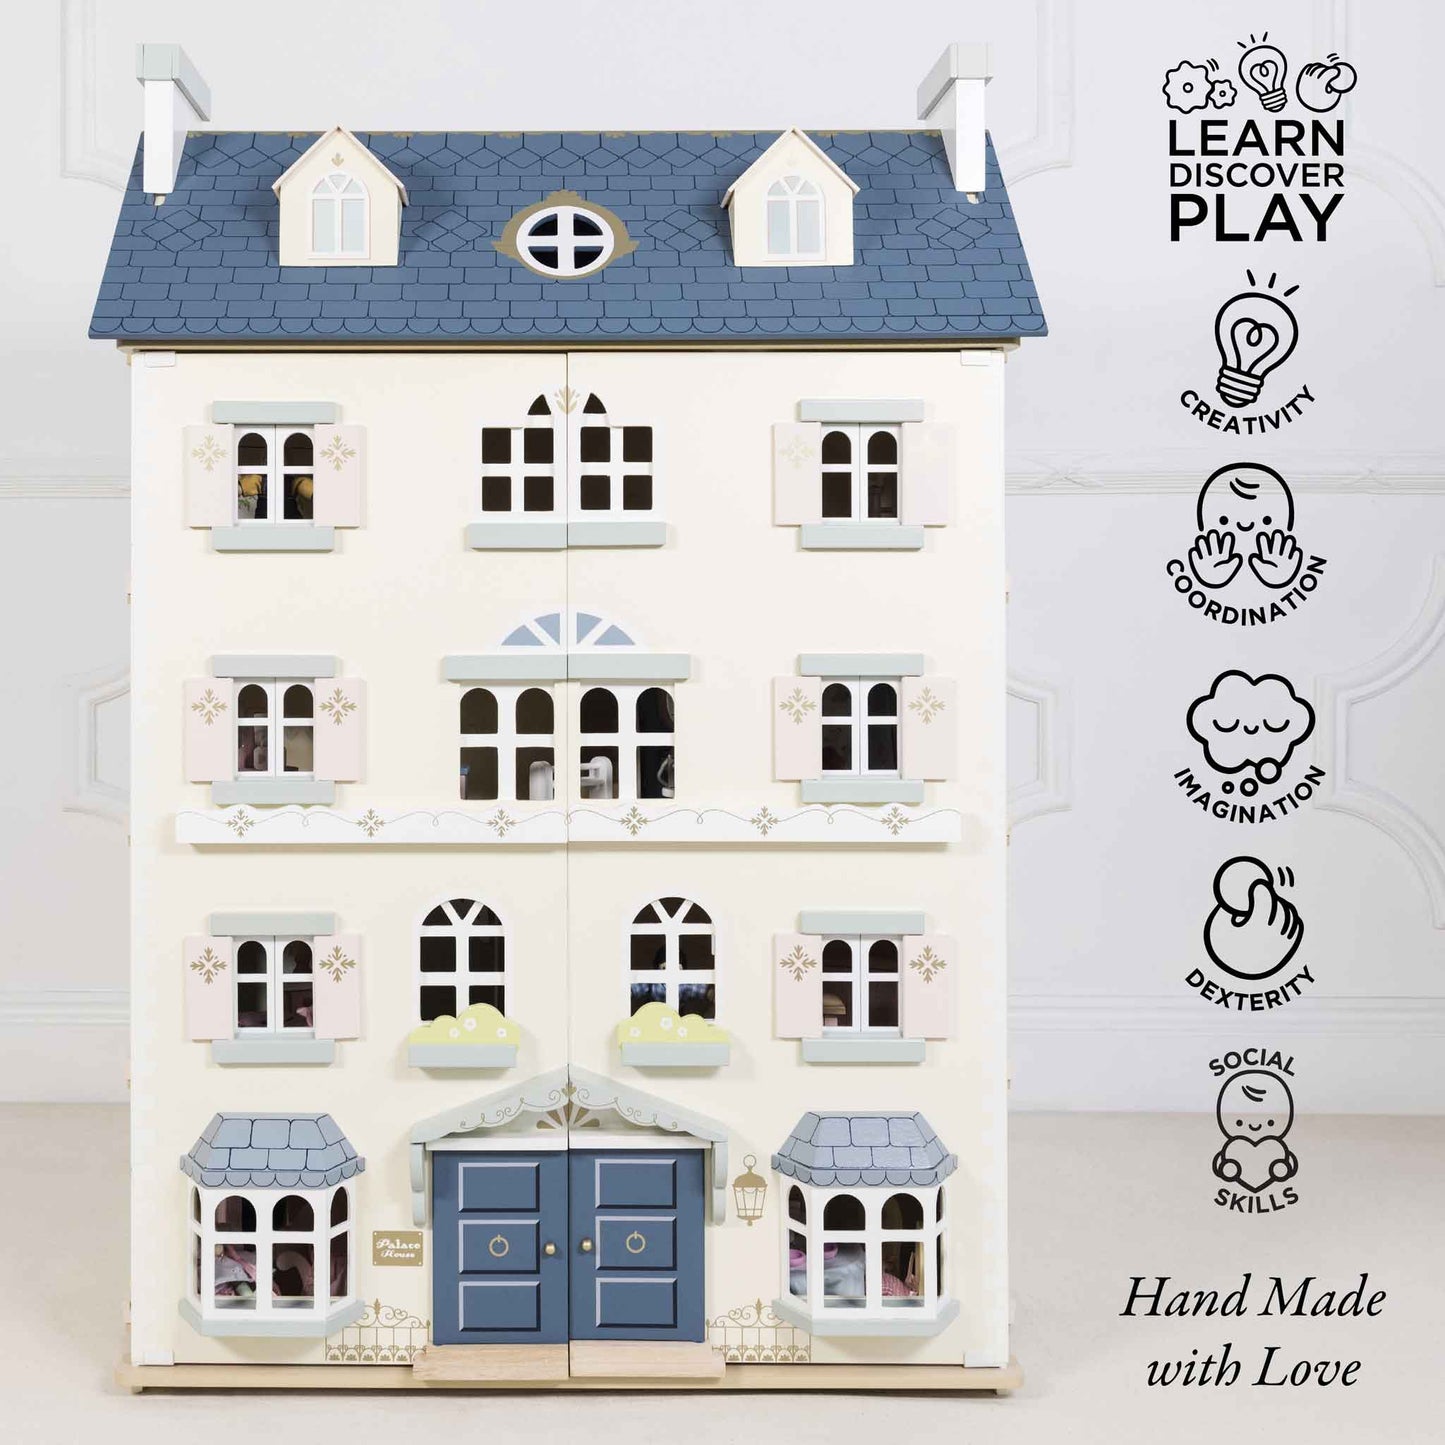 Palace Wooden Dolls House- by Le Toy Van